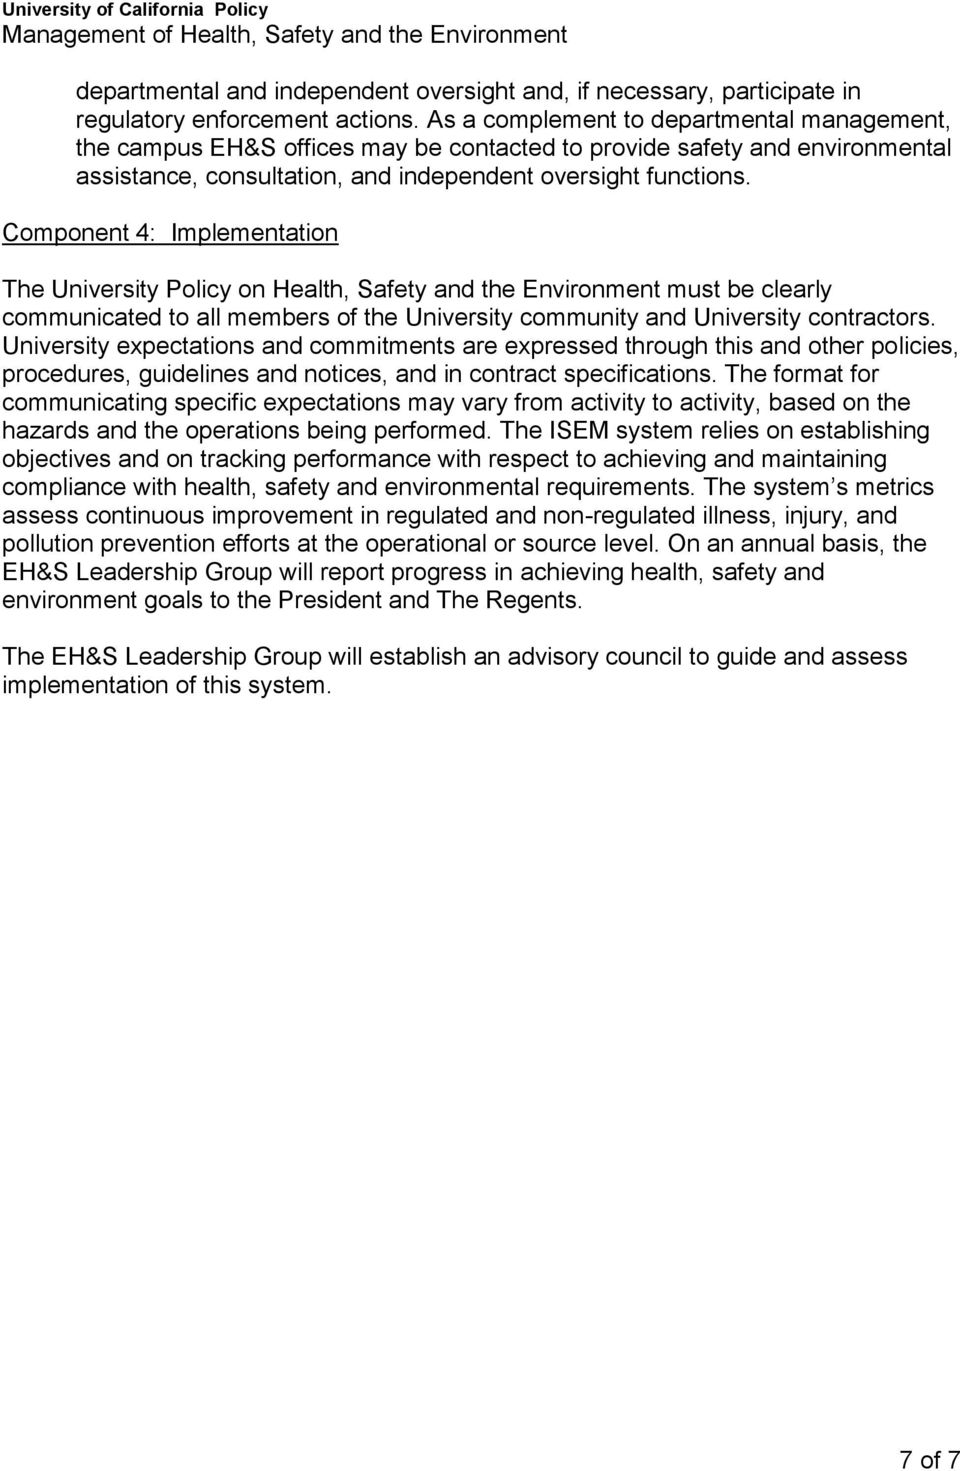 Component 4: Implementation The University Policy on Health, Safety and the Environment must be clearly communicated to all members of the University community and University contractors.